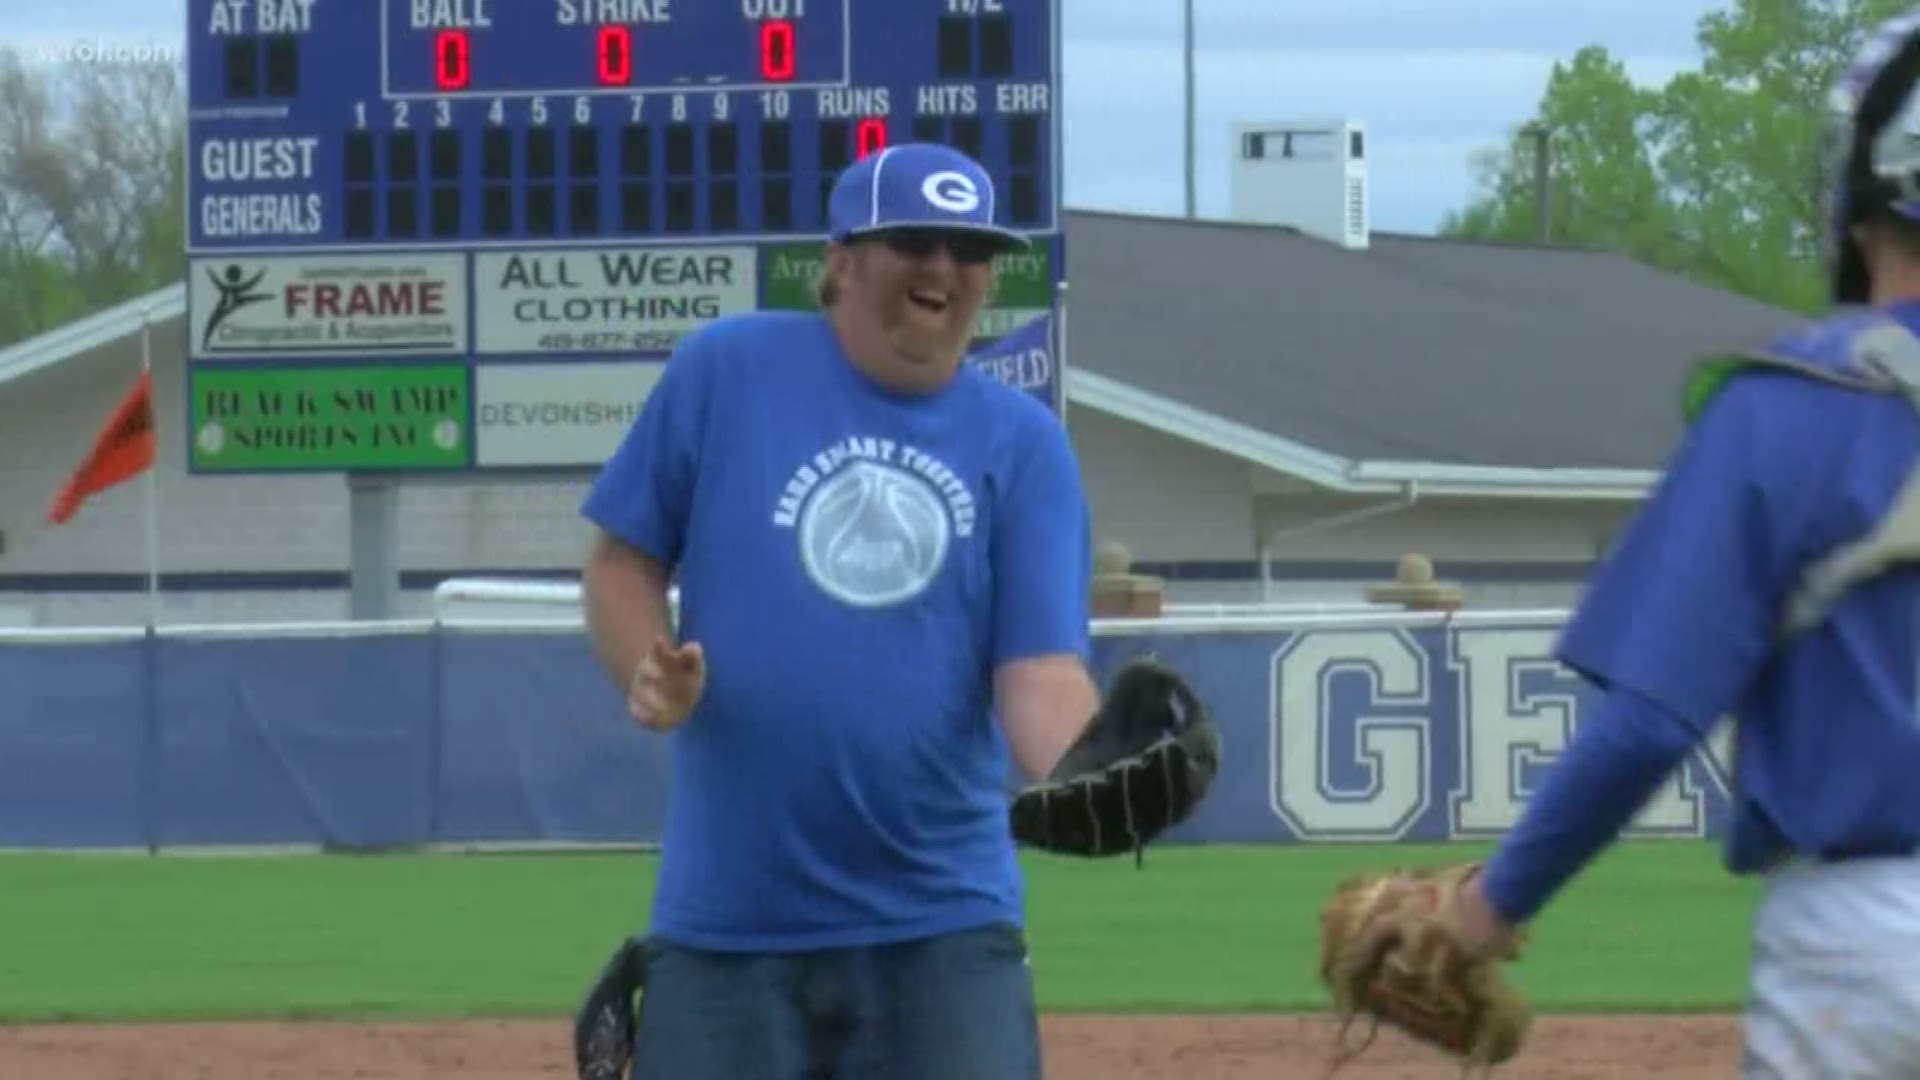 Super Fan Dan has autism, but that will never slow down his love for the Generals.